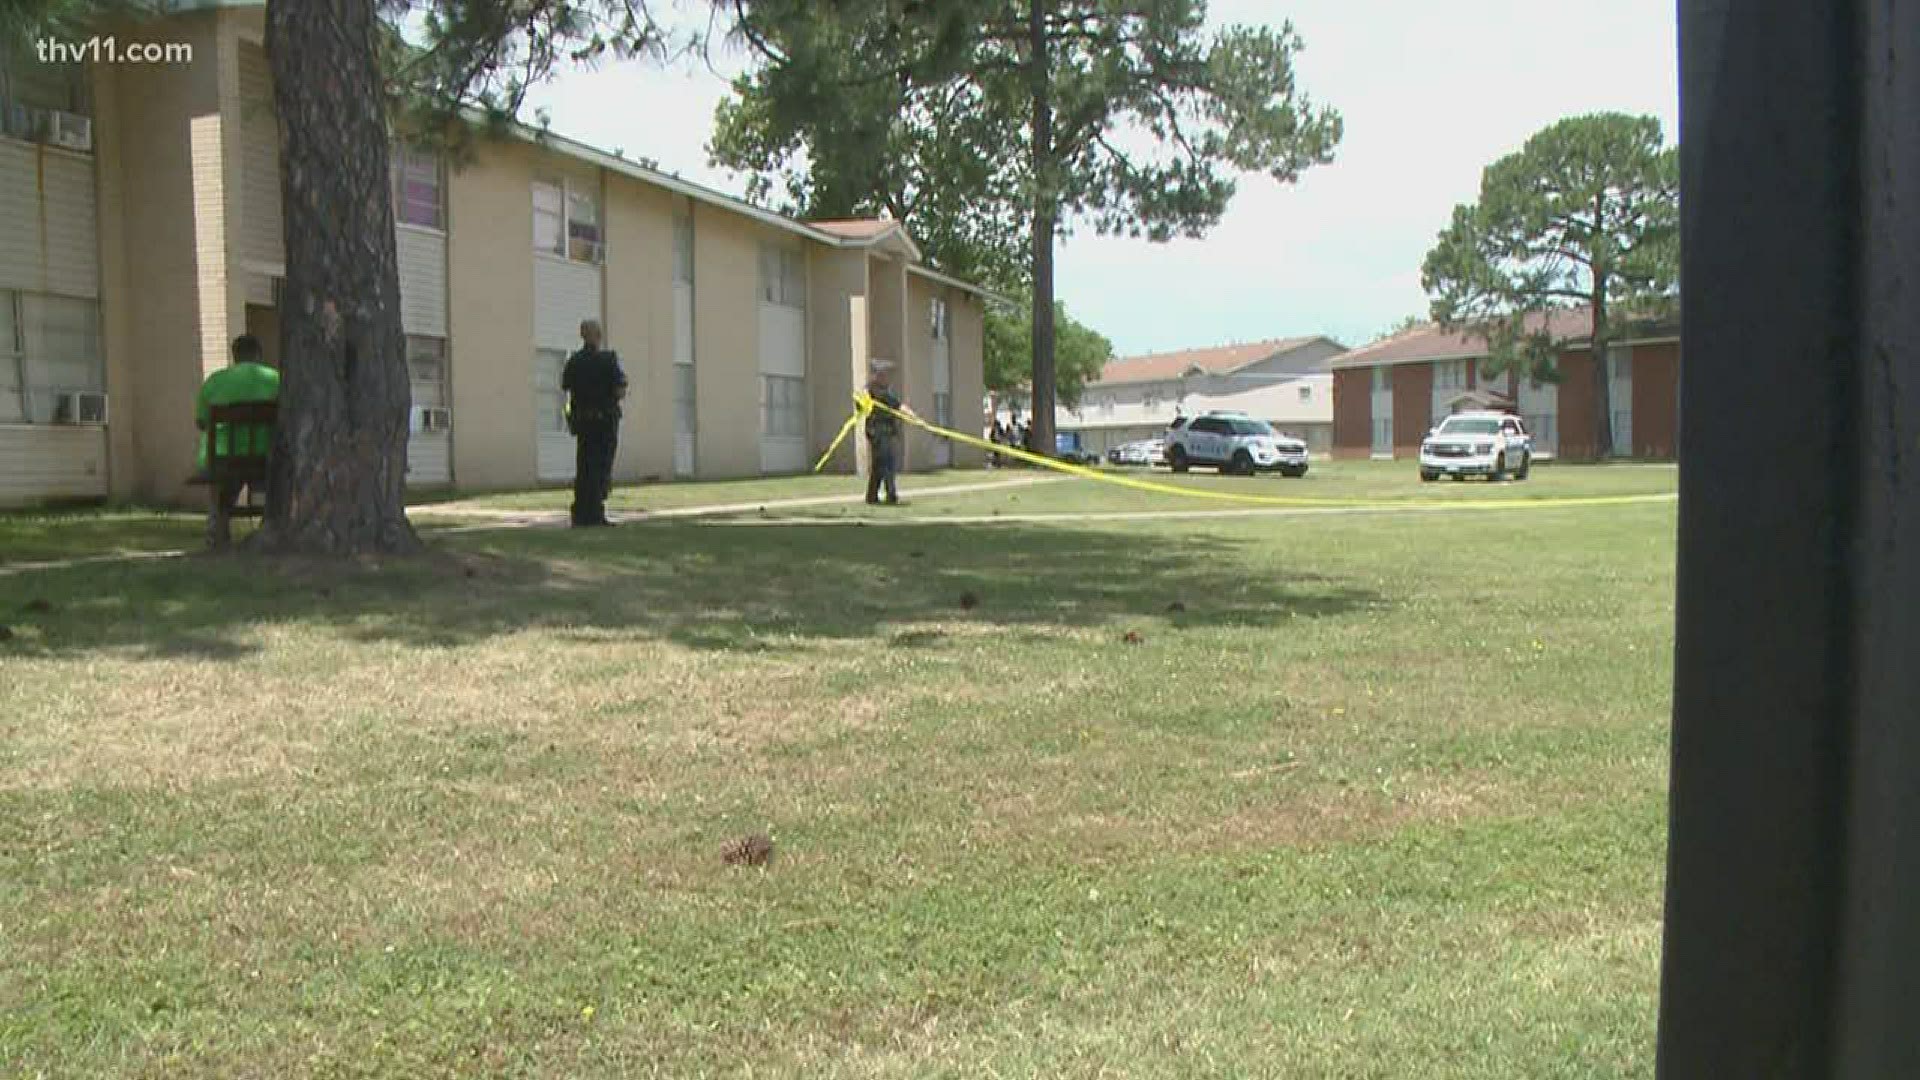 A 14-year-old boy is dead after a shooting at a North Little Rock apartment complex.